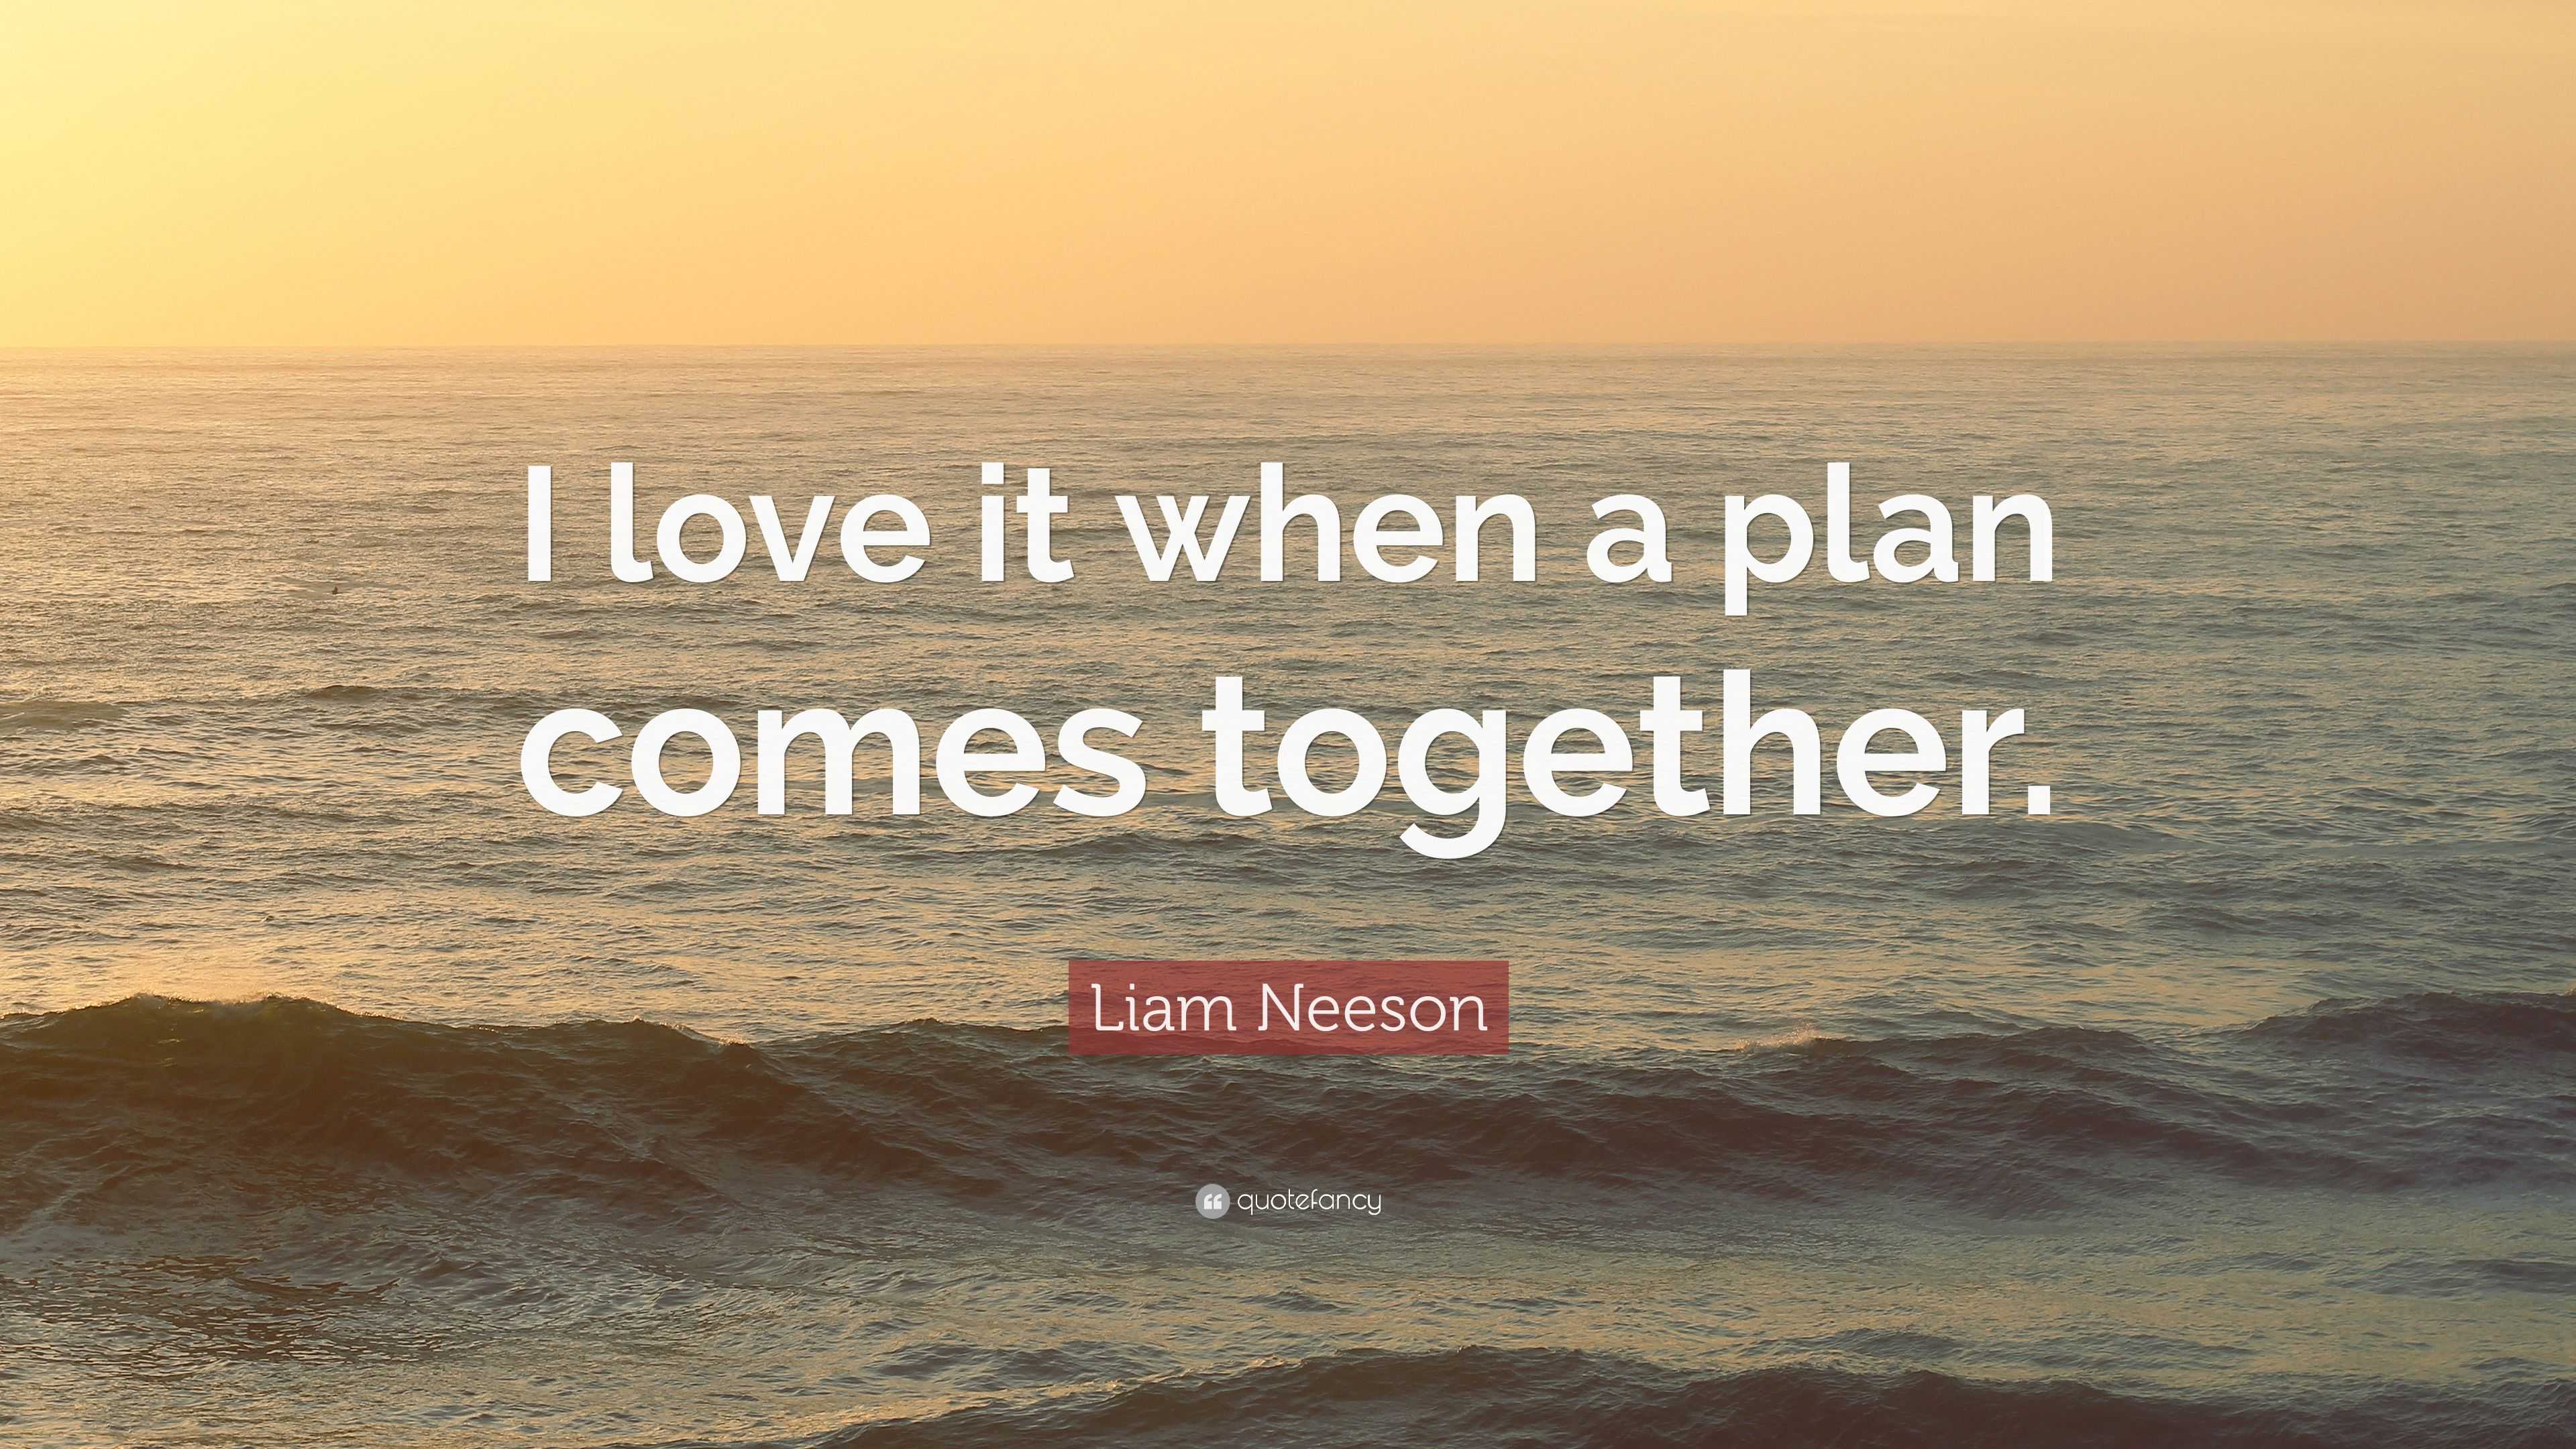 2051165 Liam Neeson Quote I Love It When A Plan Comes Together 